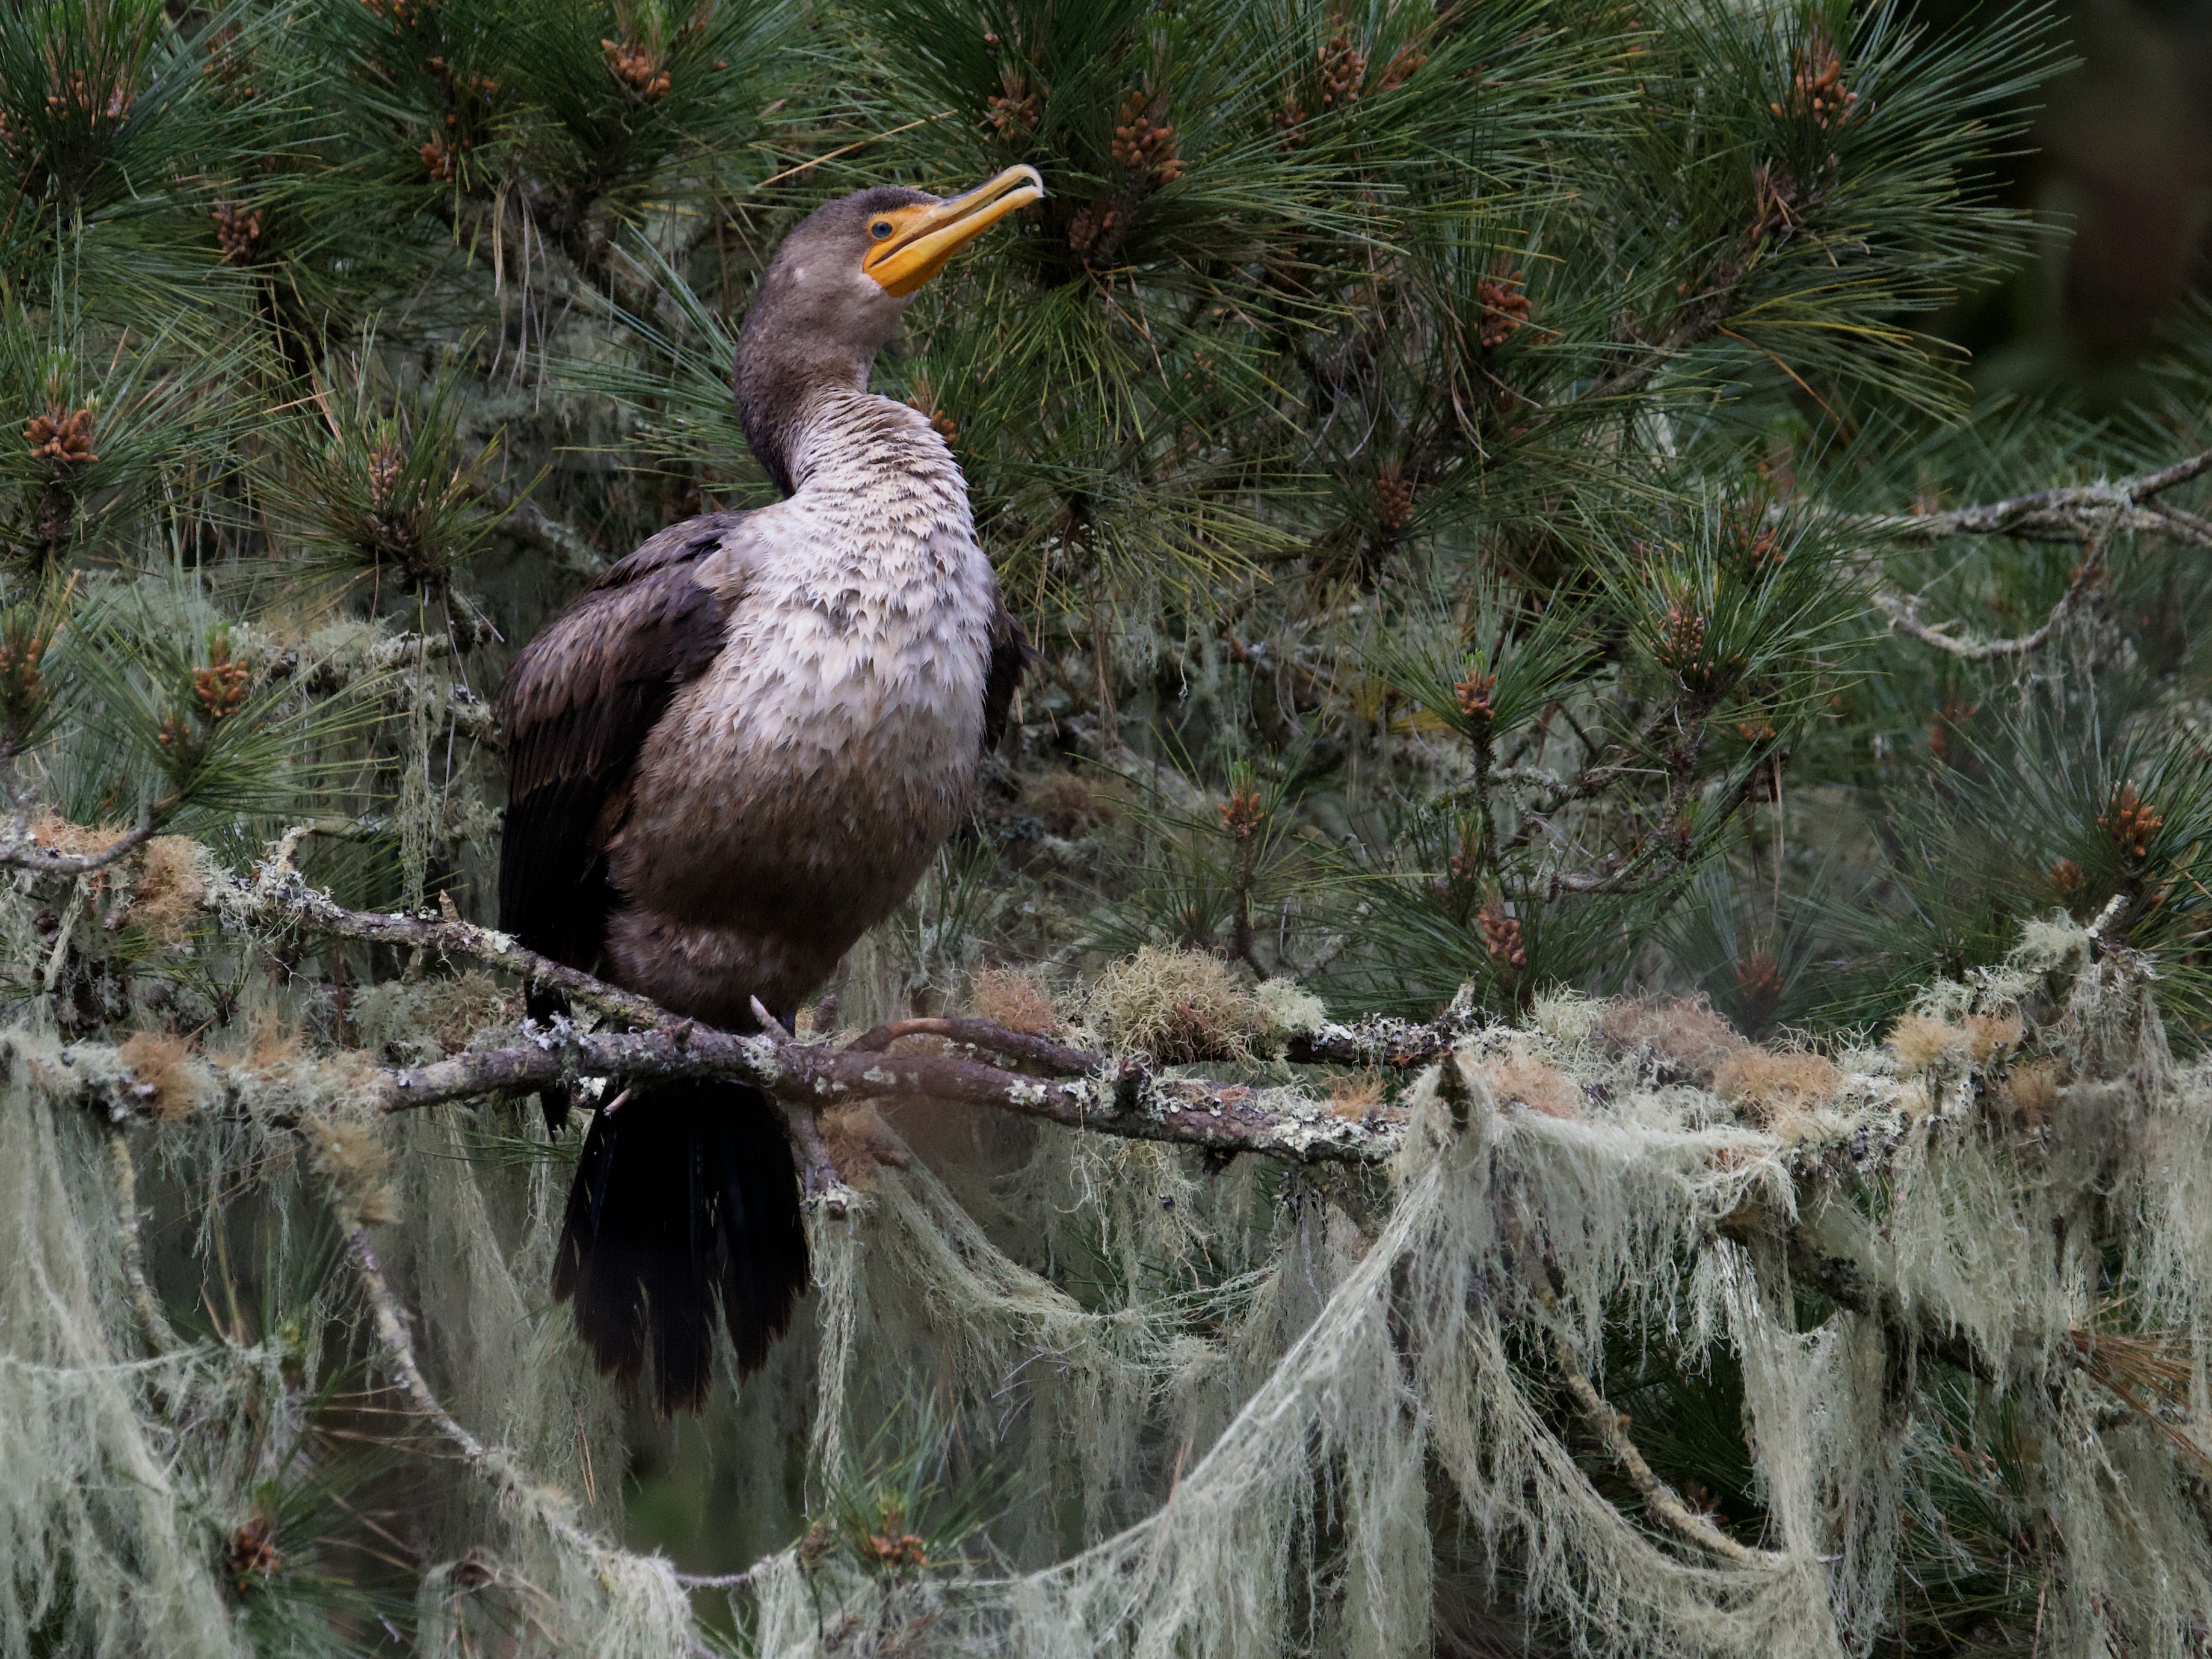 Double-Crested Cormorant in Mossy Tree at Golden Gate Park